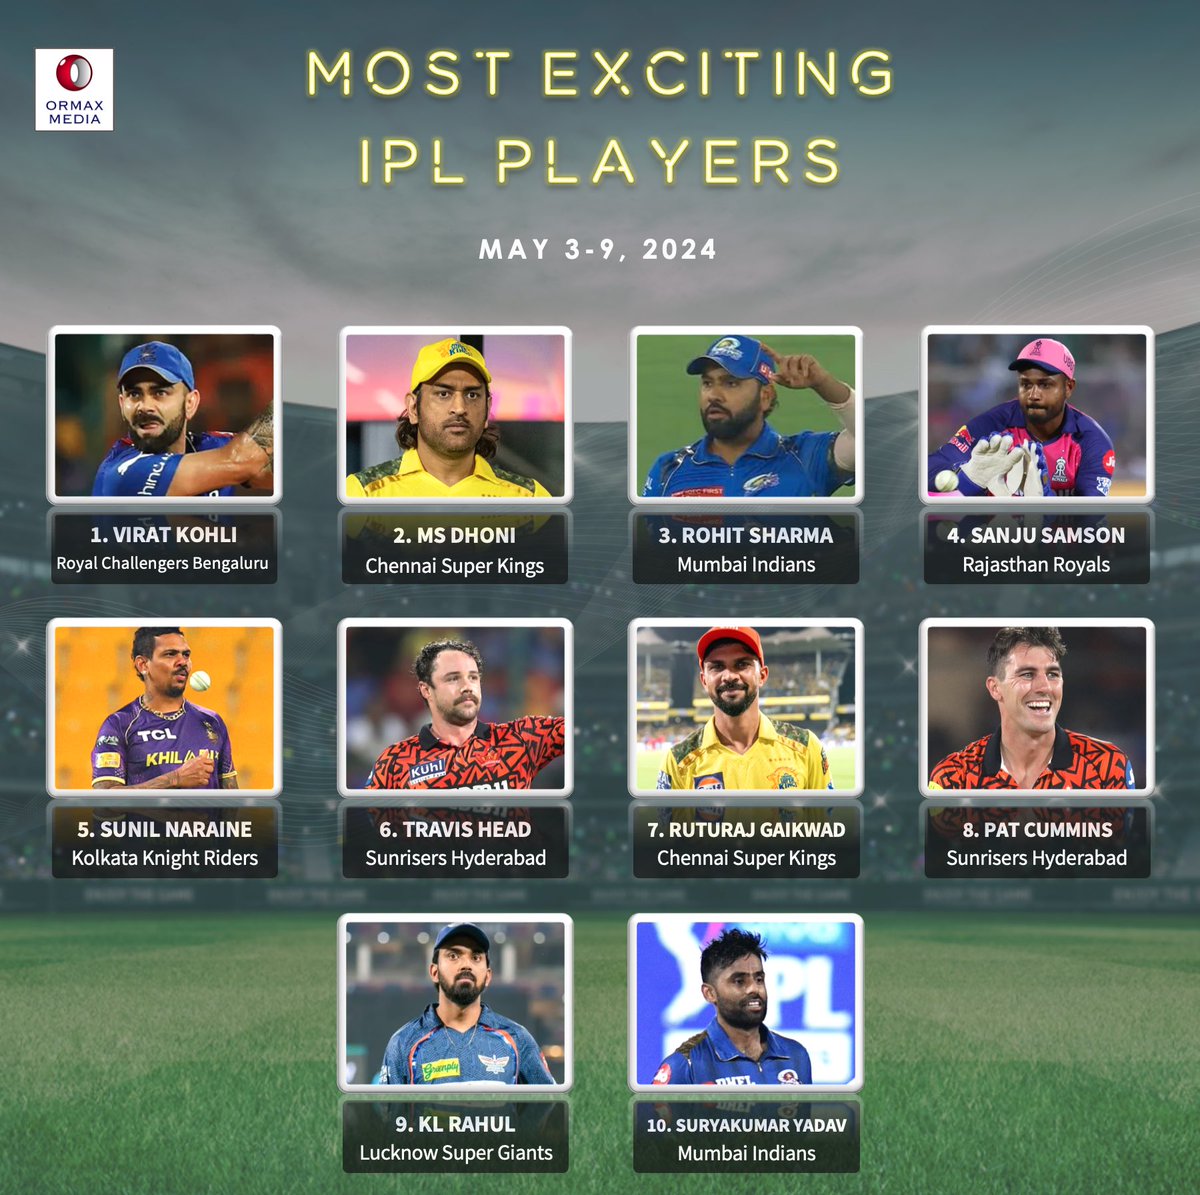 Most exciting IPL players (May 3-9) #IPL2024